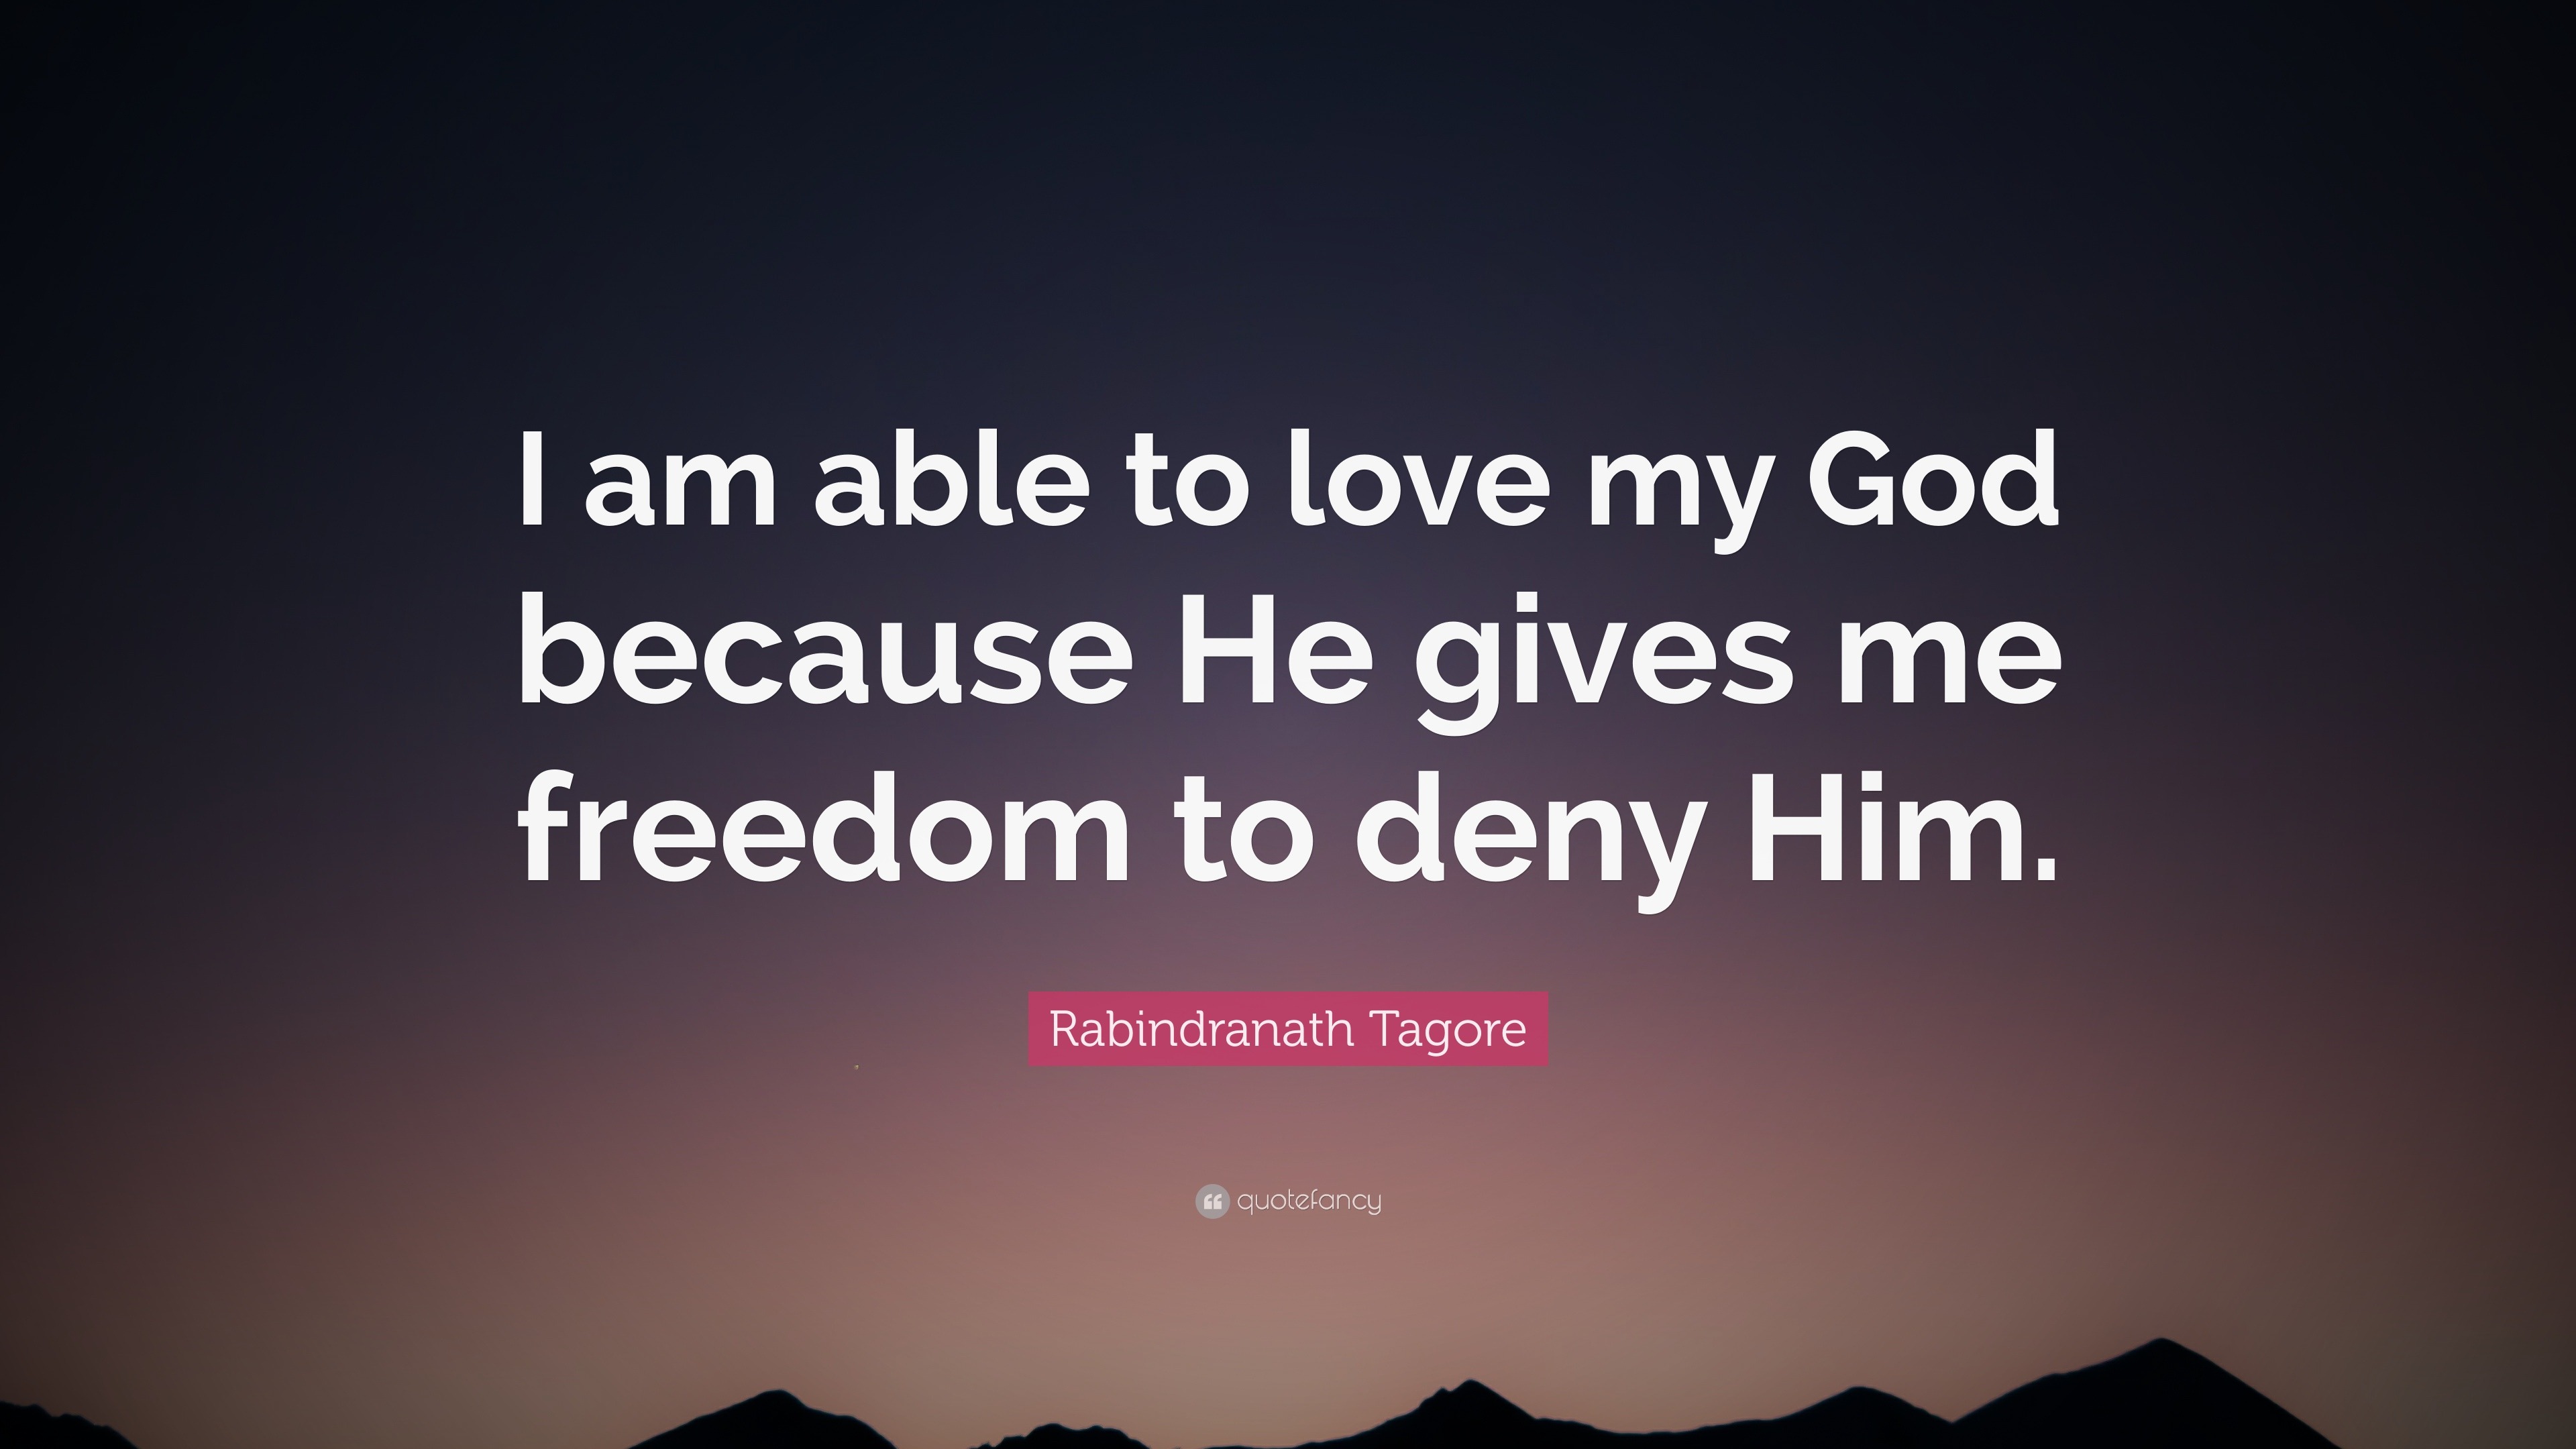 Rabindranath Tagore Quote “I am able to love my God because He gives me